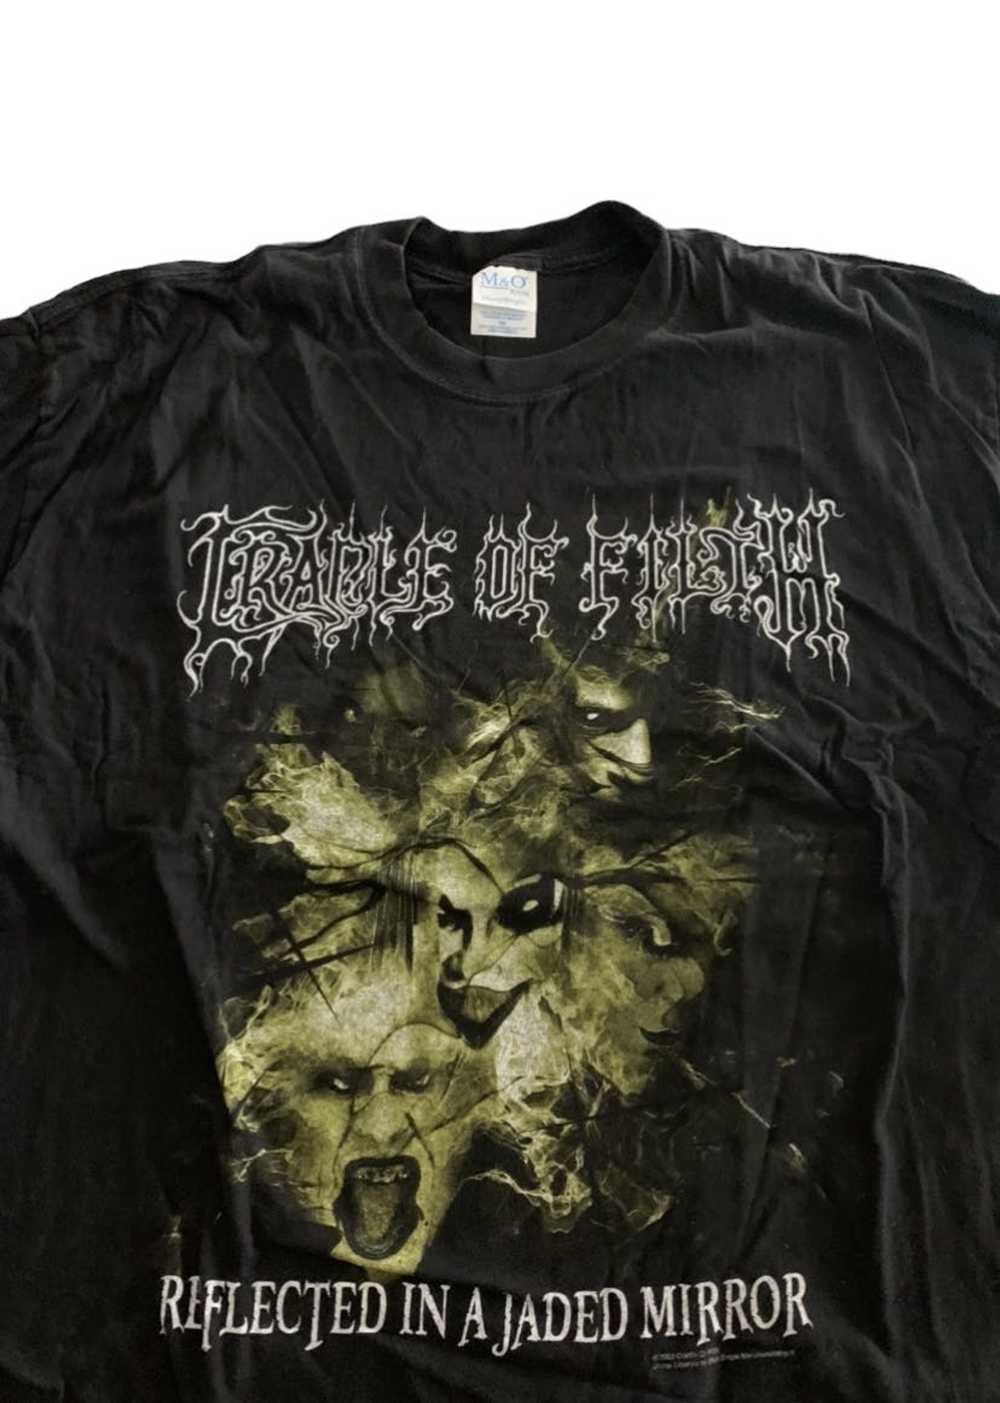 Archival Clothing Vintage Cradle of Filth Tee - image 1